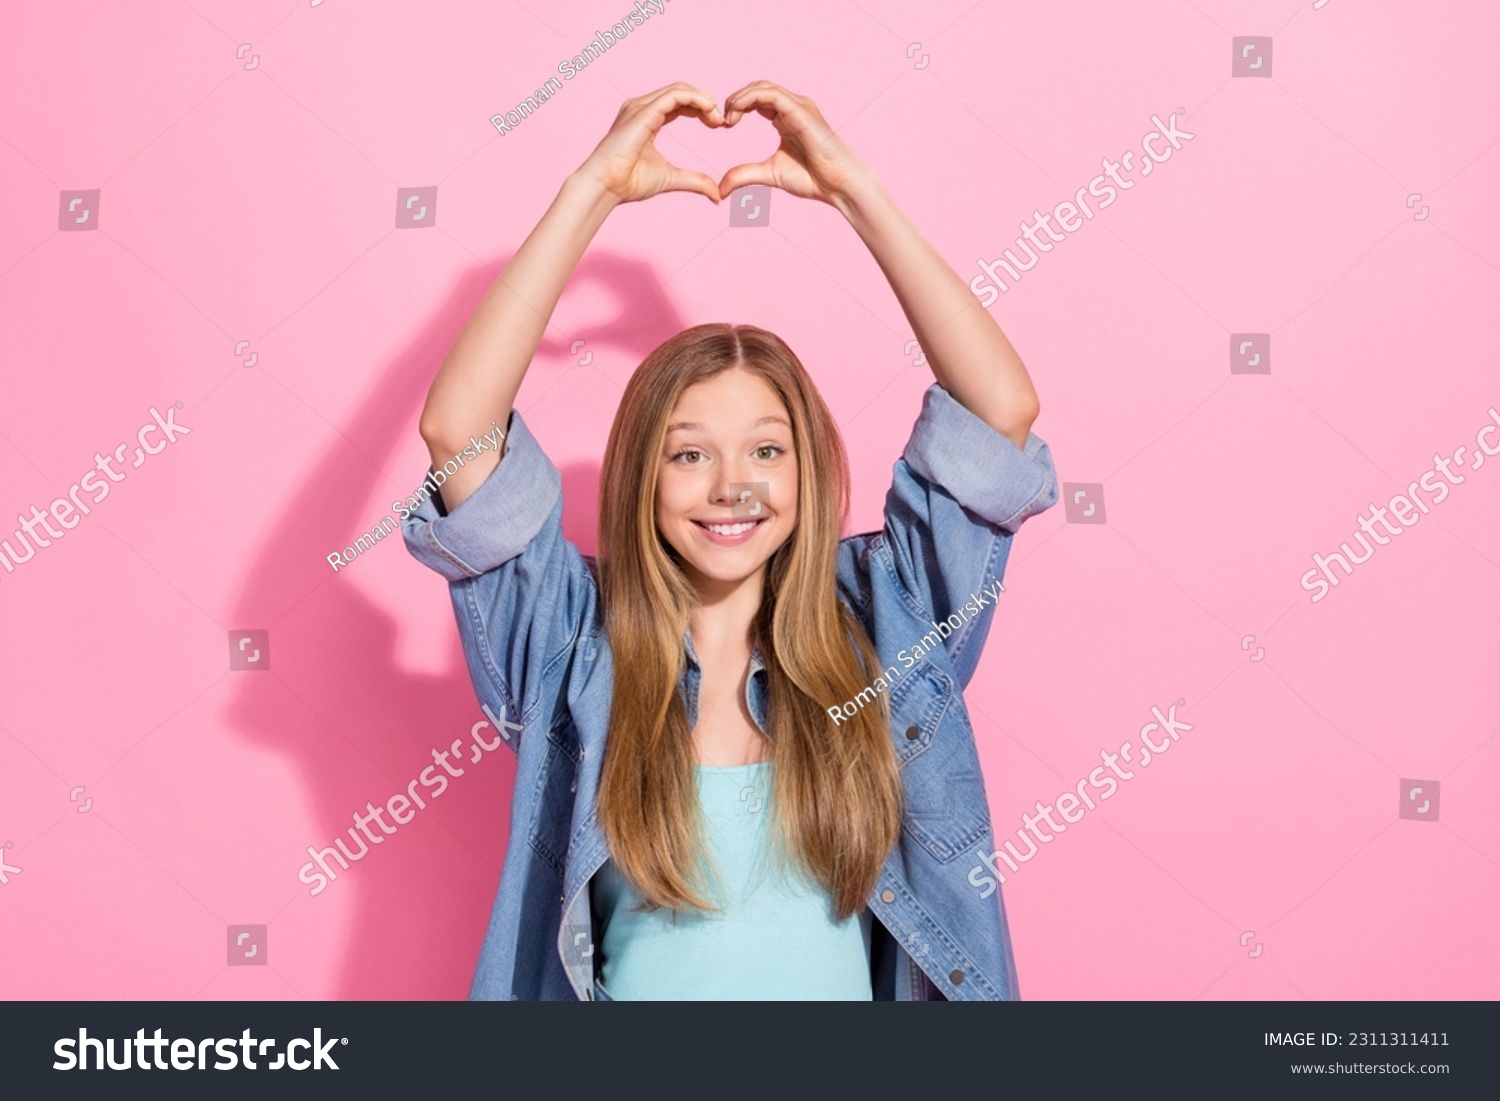 Photo portrait of lovely young teenager lady raise hands heart shape gesture wear trendy jeans garment isolated on pink color background #2311311411